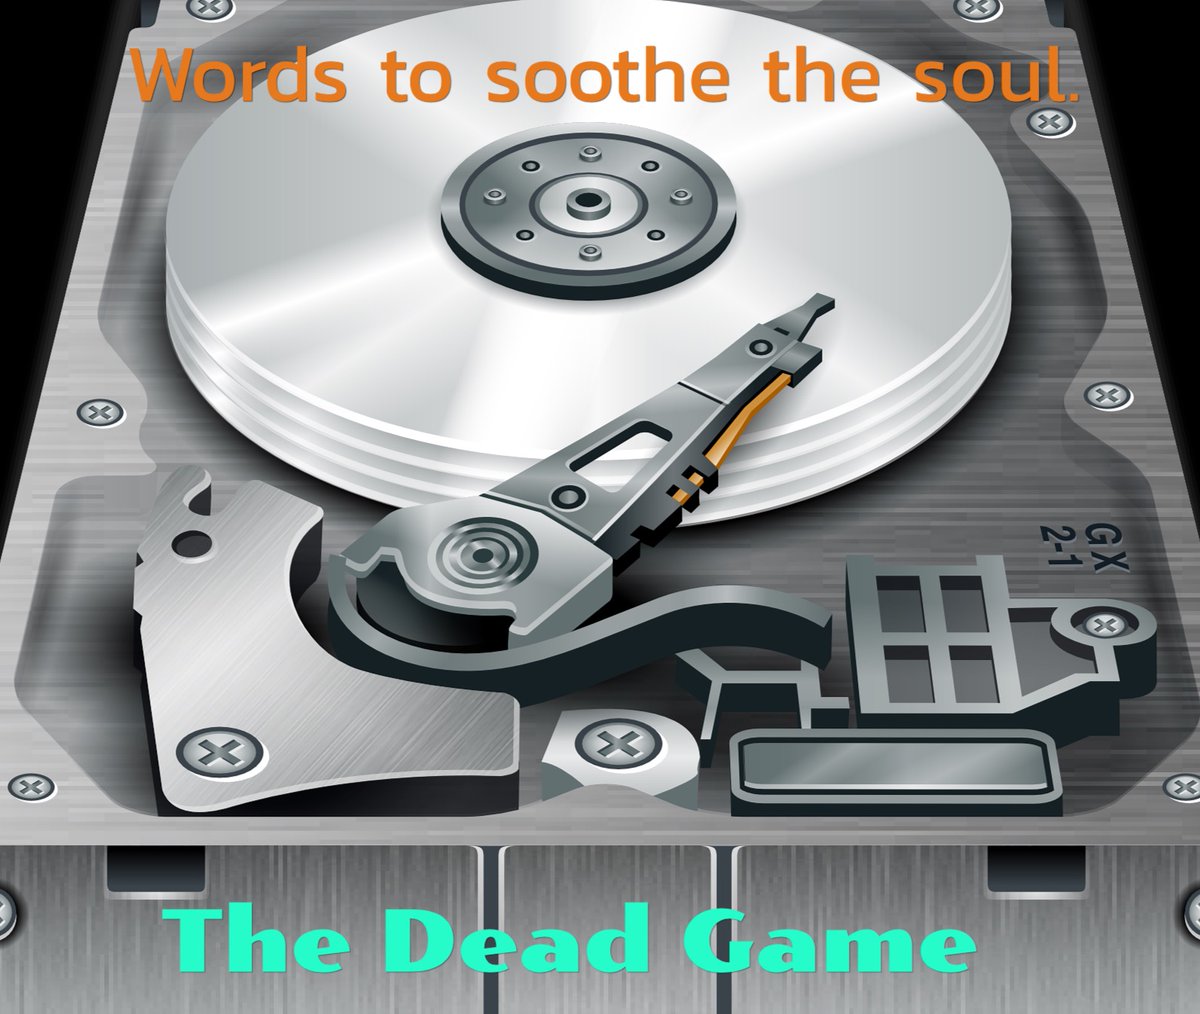 Sing me a love song. Rhyme me a sad tale. The woe of heartbroken lovers, Their tinny cries take to the air. The needle rides the grooves. Round in a circle, it goes. THE DEAD GAME amzn.to/2nkhyHU #Love_seeker #romancenovels #BookTwitter